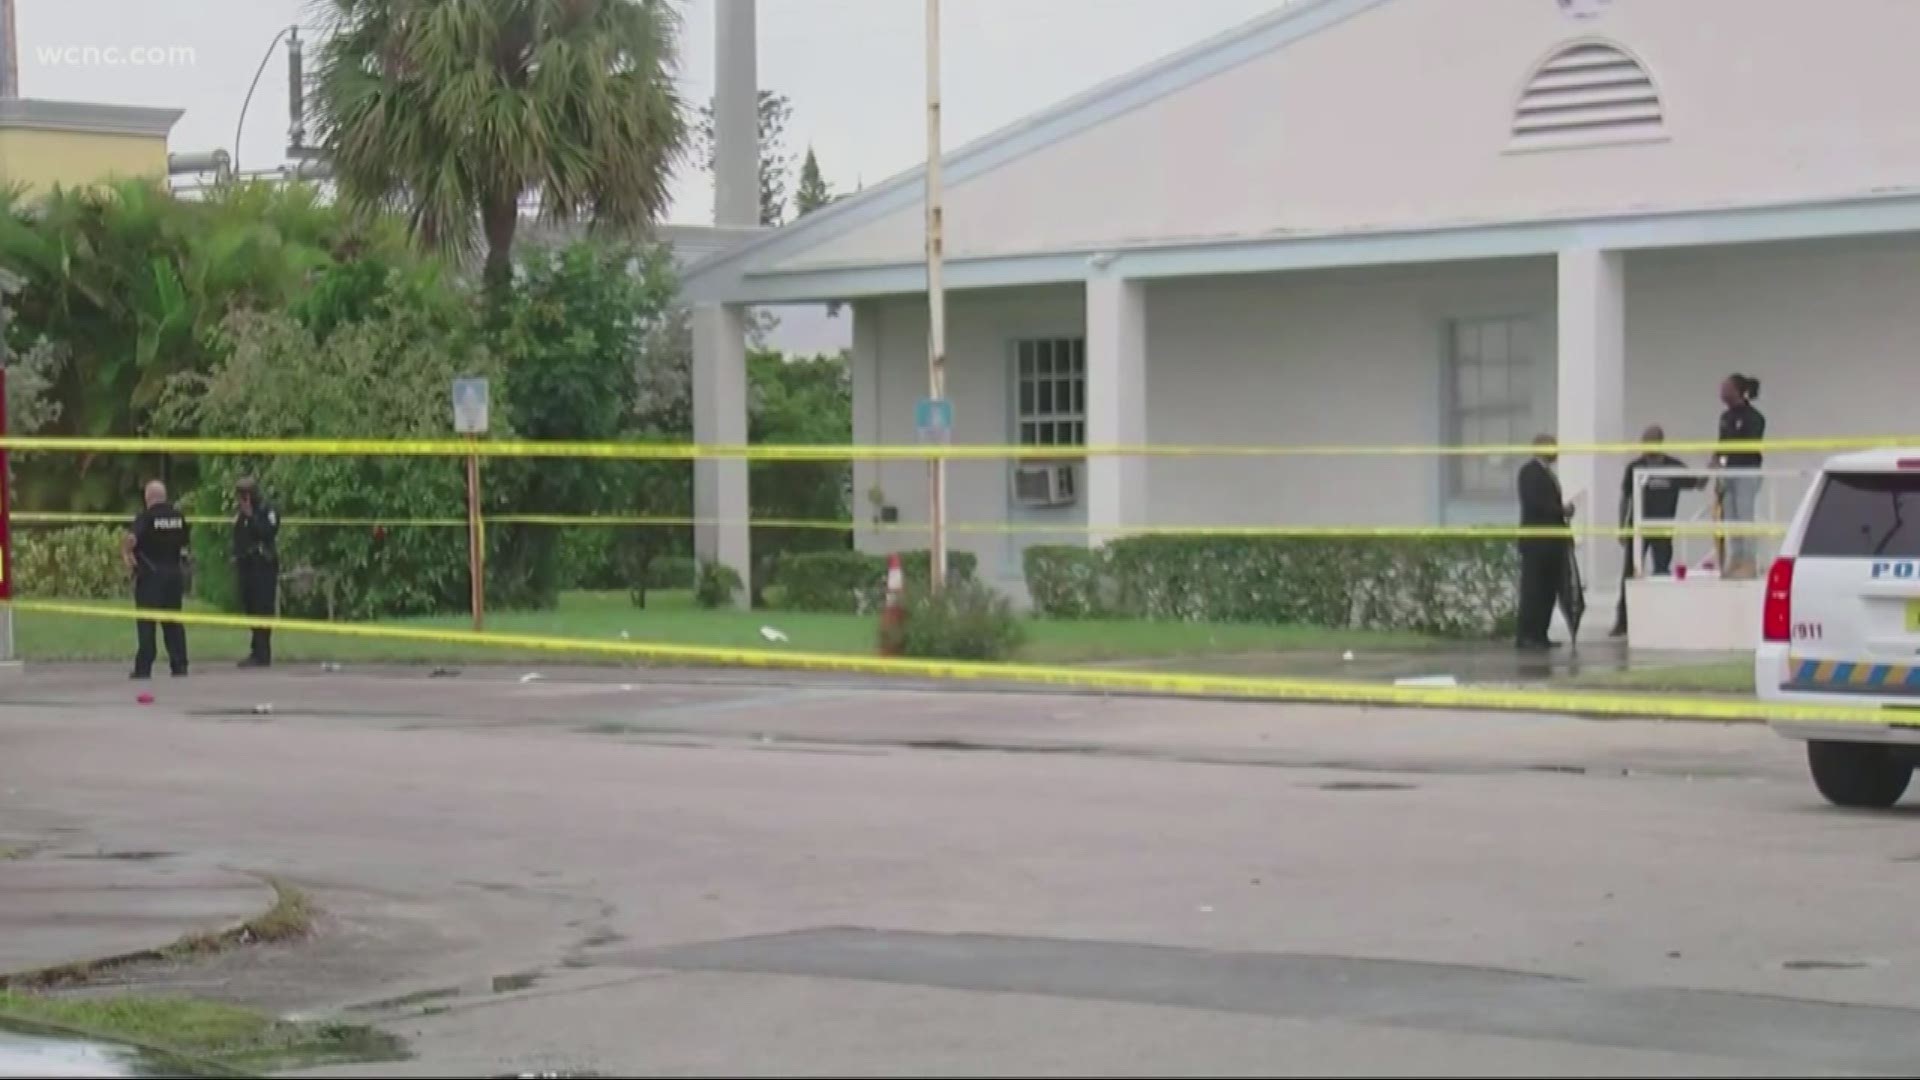 A shooting in Florida left two people dead and two others hurt, according to police. The shooting happened at a church after a funeral.